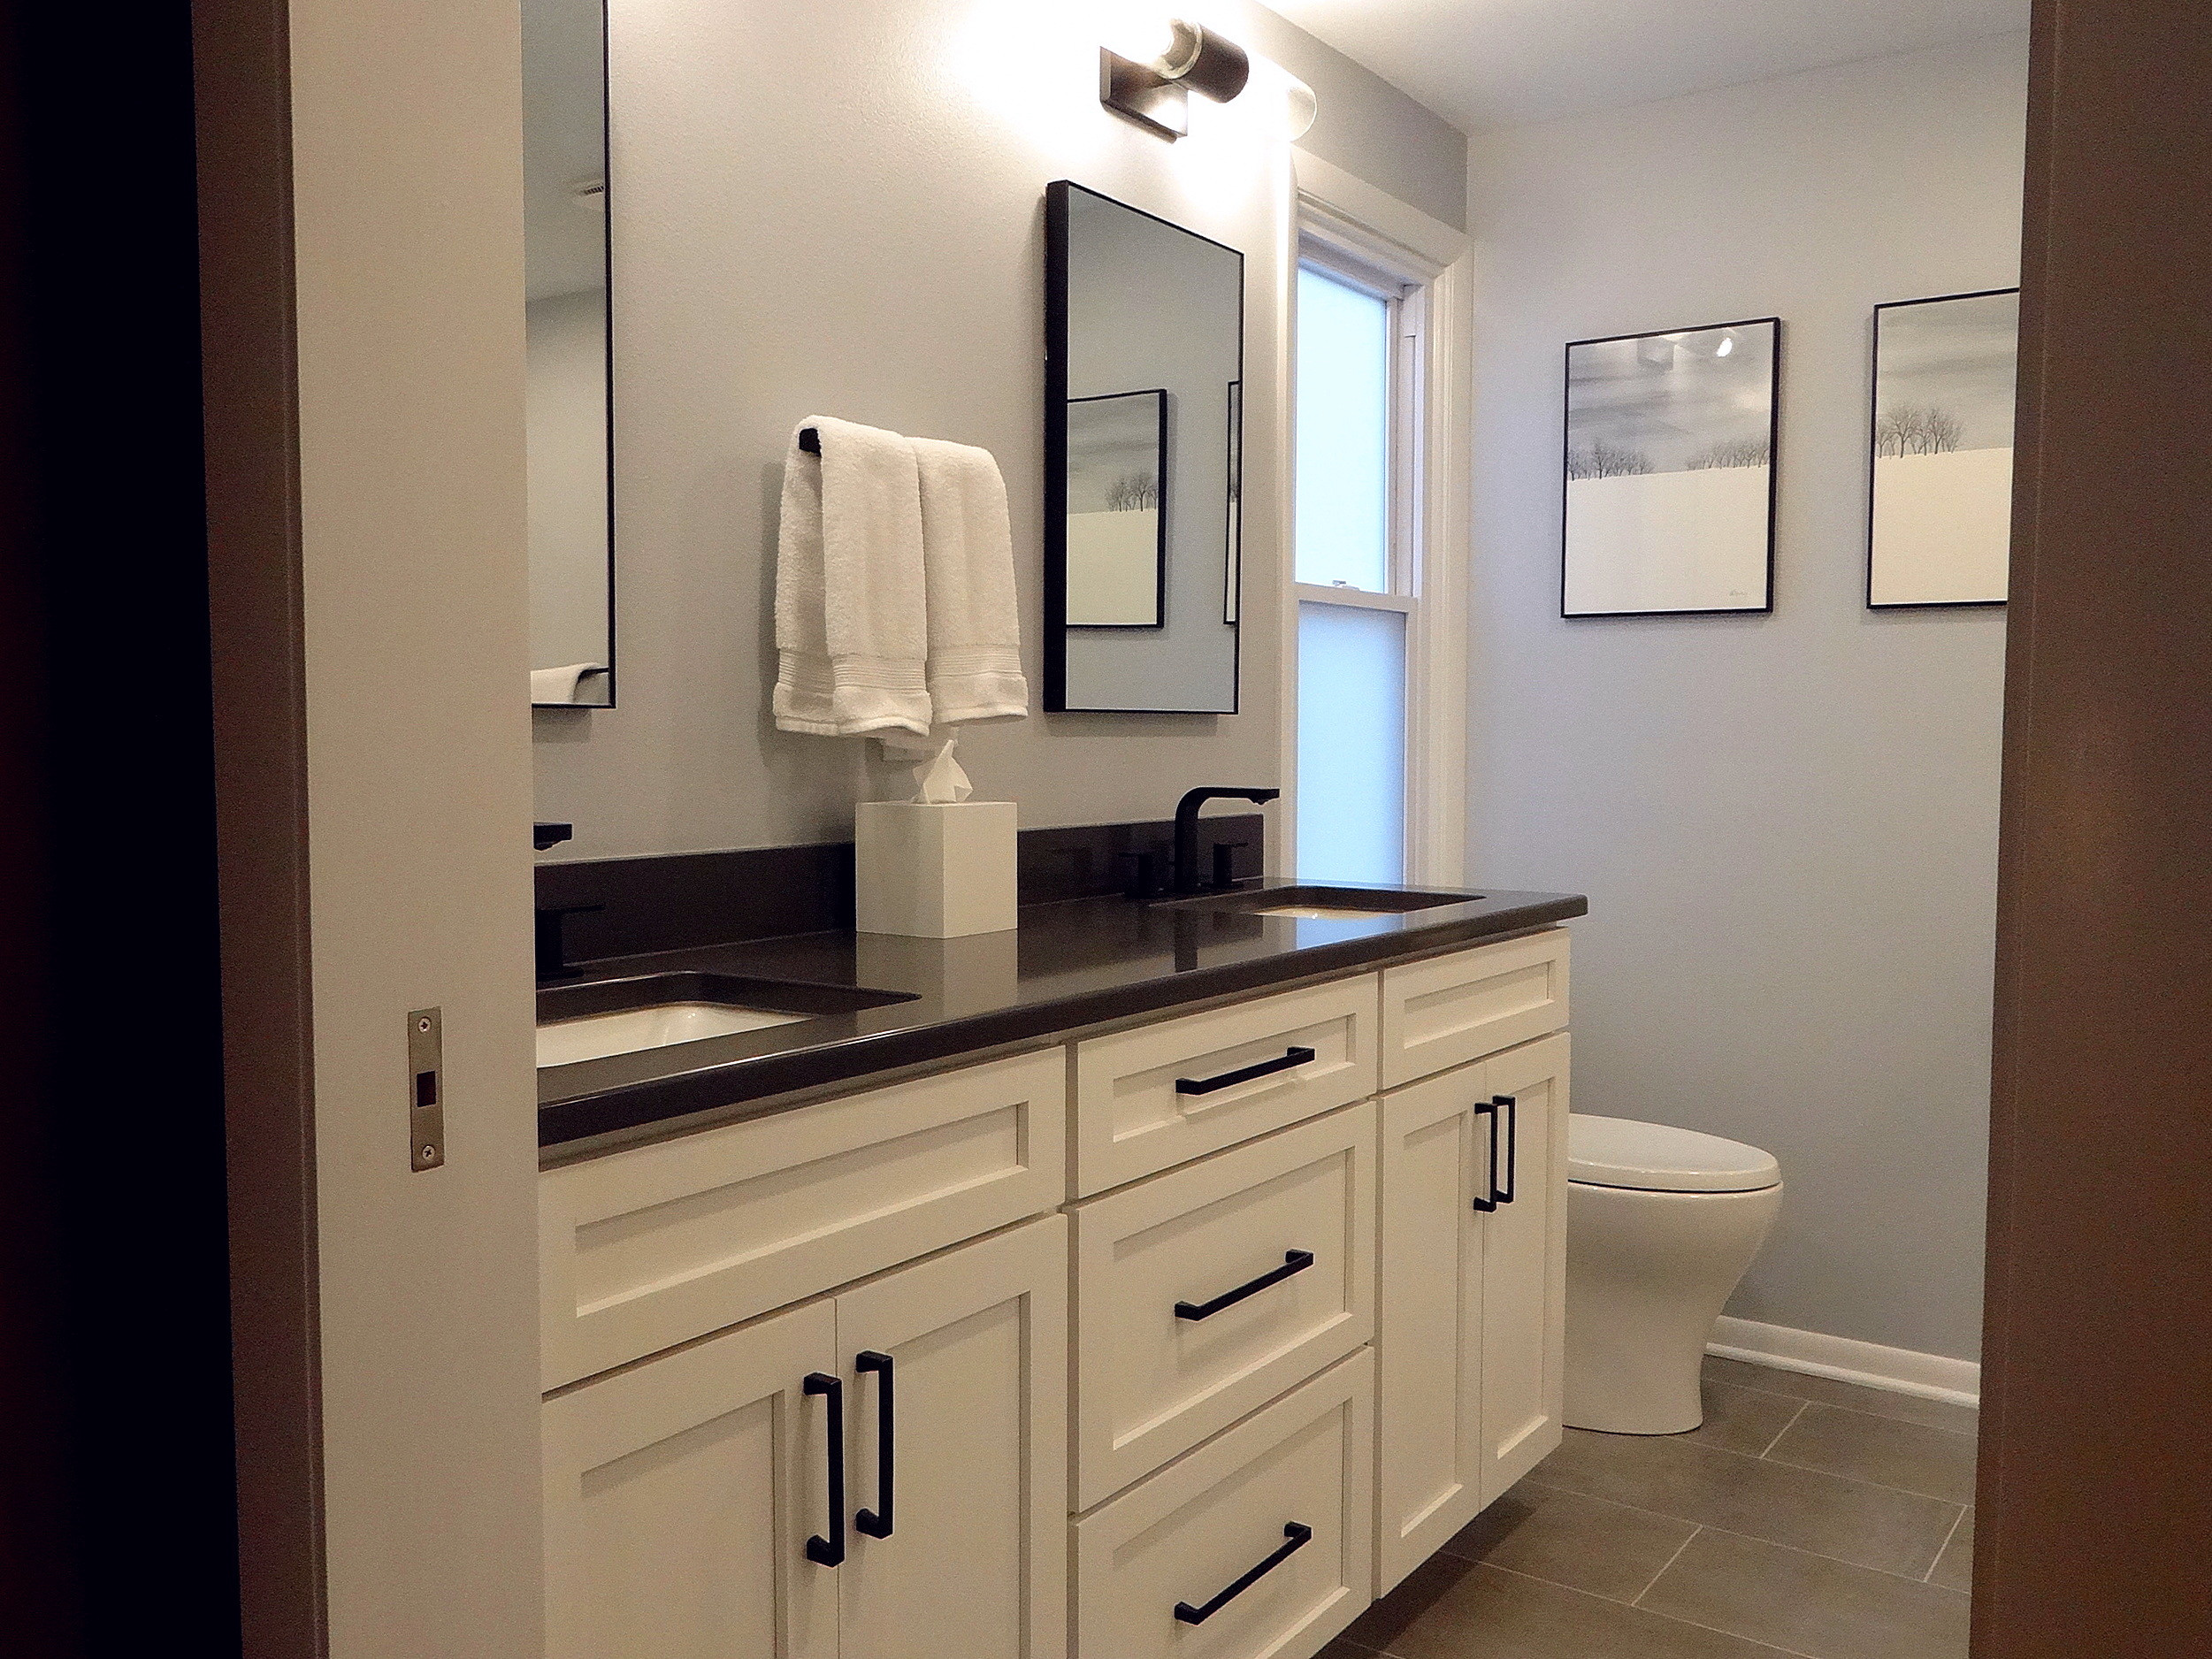 Greendale Residence - Master and Main Bath Remodel